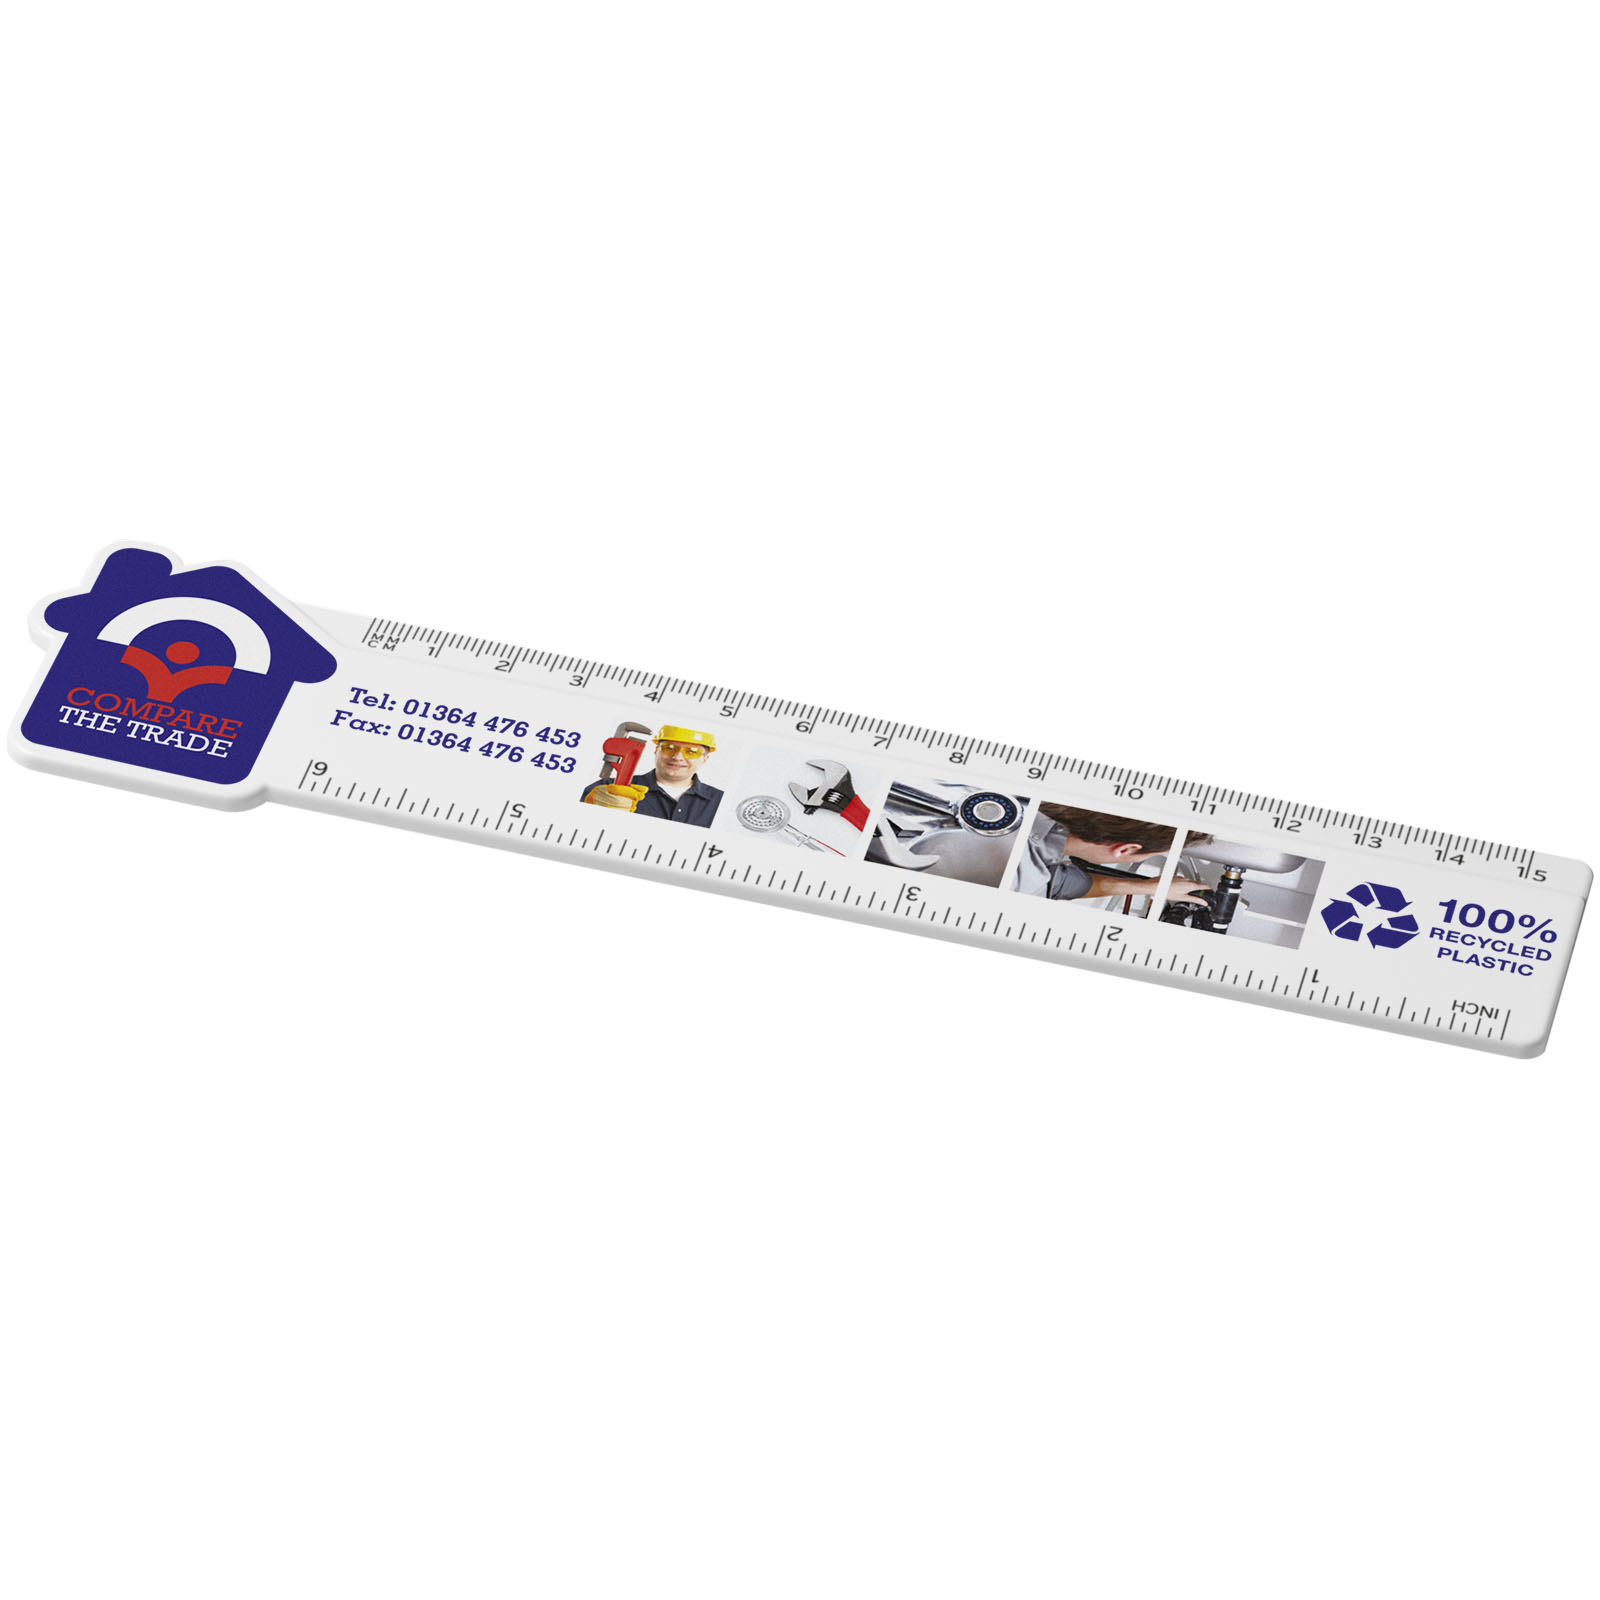 Advertising Desk Accessories - Tait 15 cm house-shaped recycled plastic ruler - 0